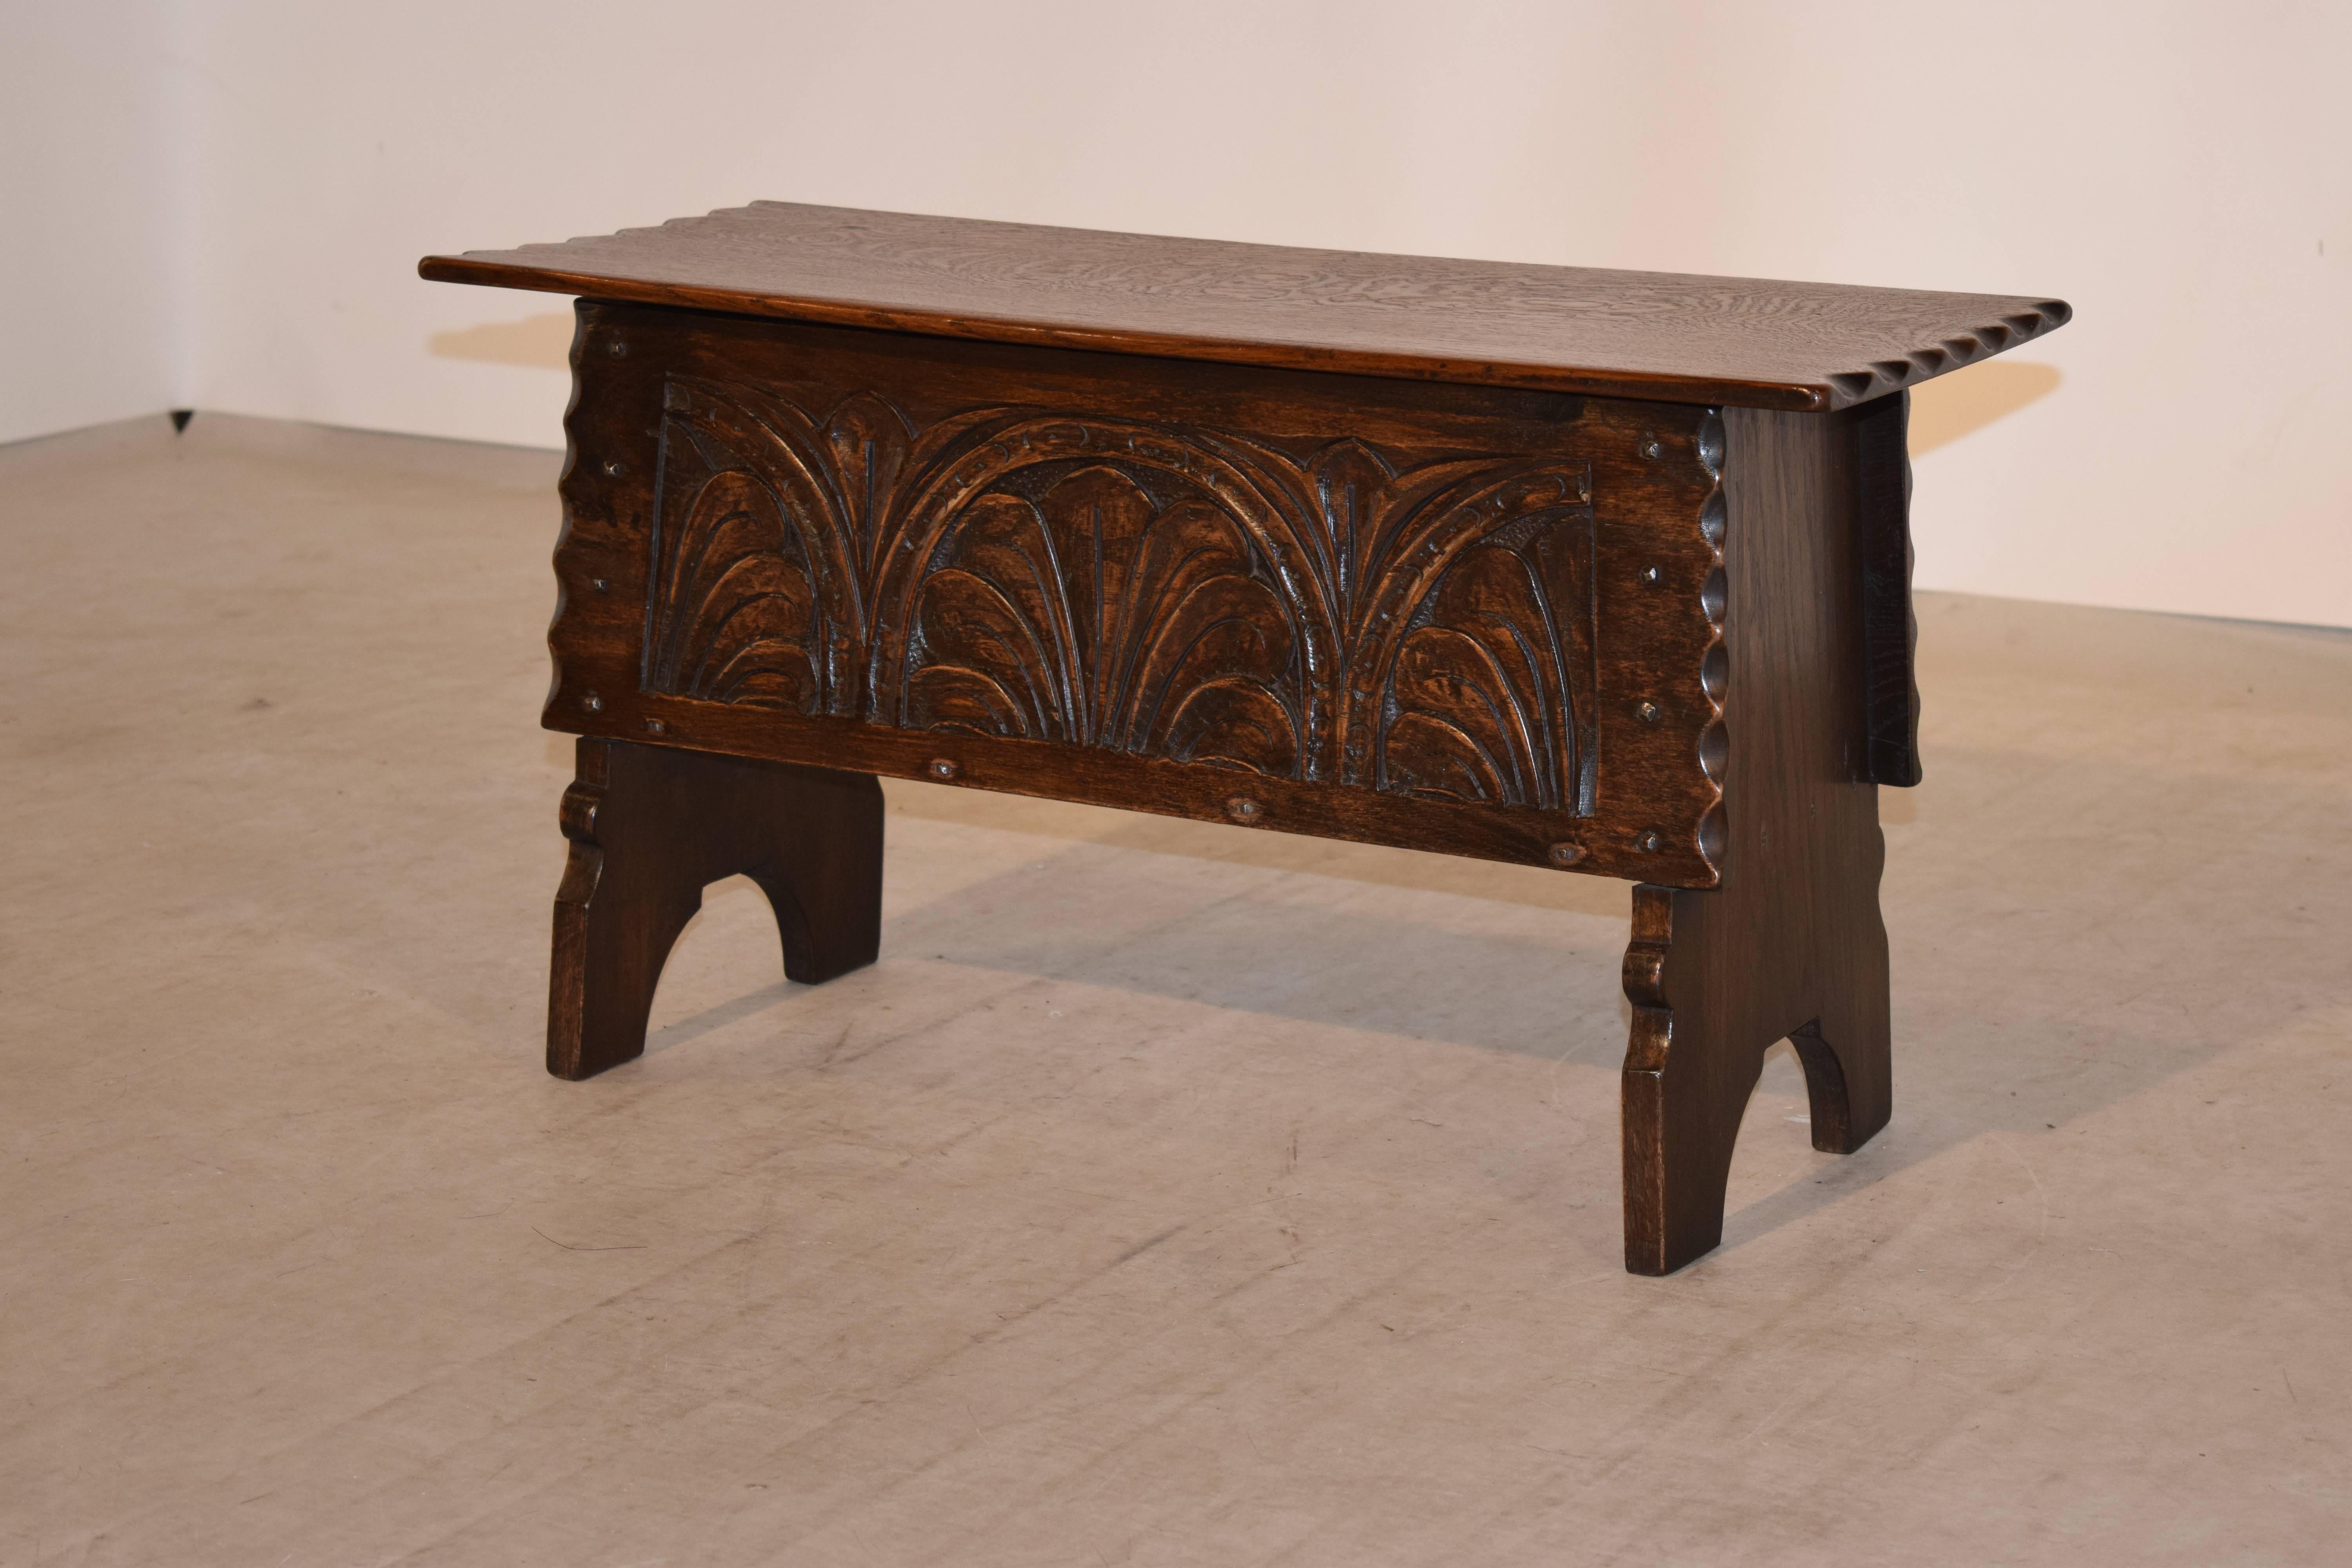 19th century oak bench with a lift top from England. The top is a single board with a pie crust edge, following down to a carved panel on the front, also with a pie crust edge. It has simple legs that are joined to the front and back with hand made